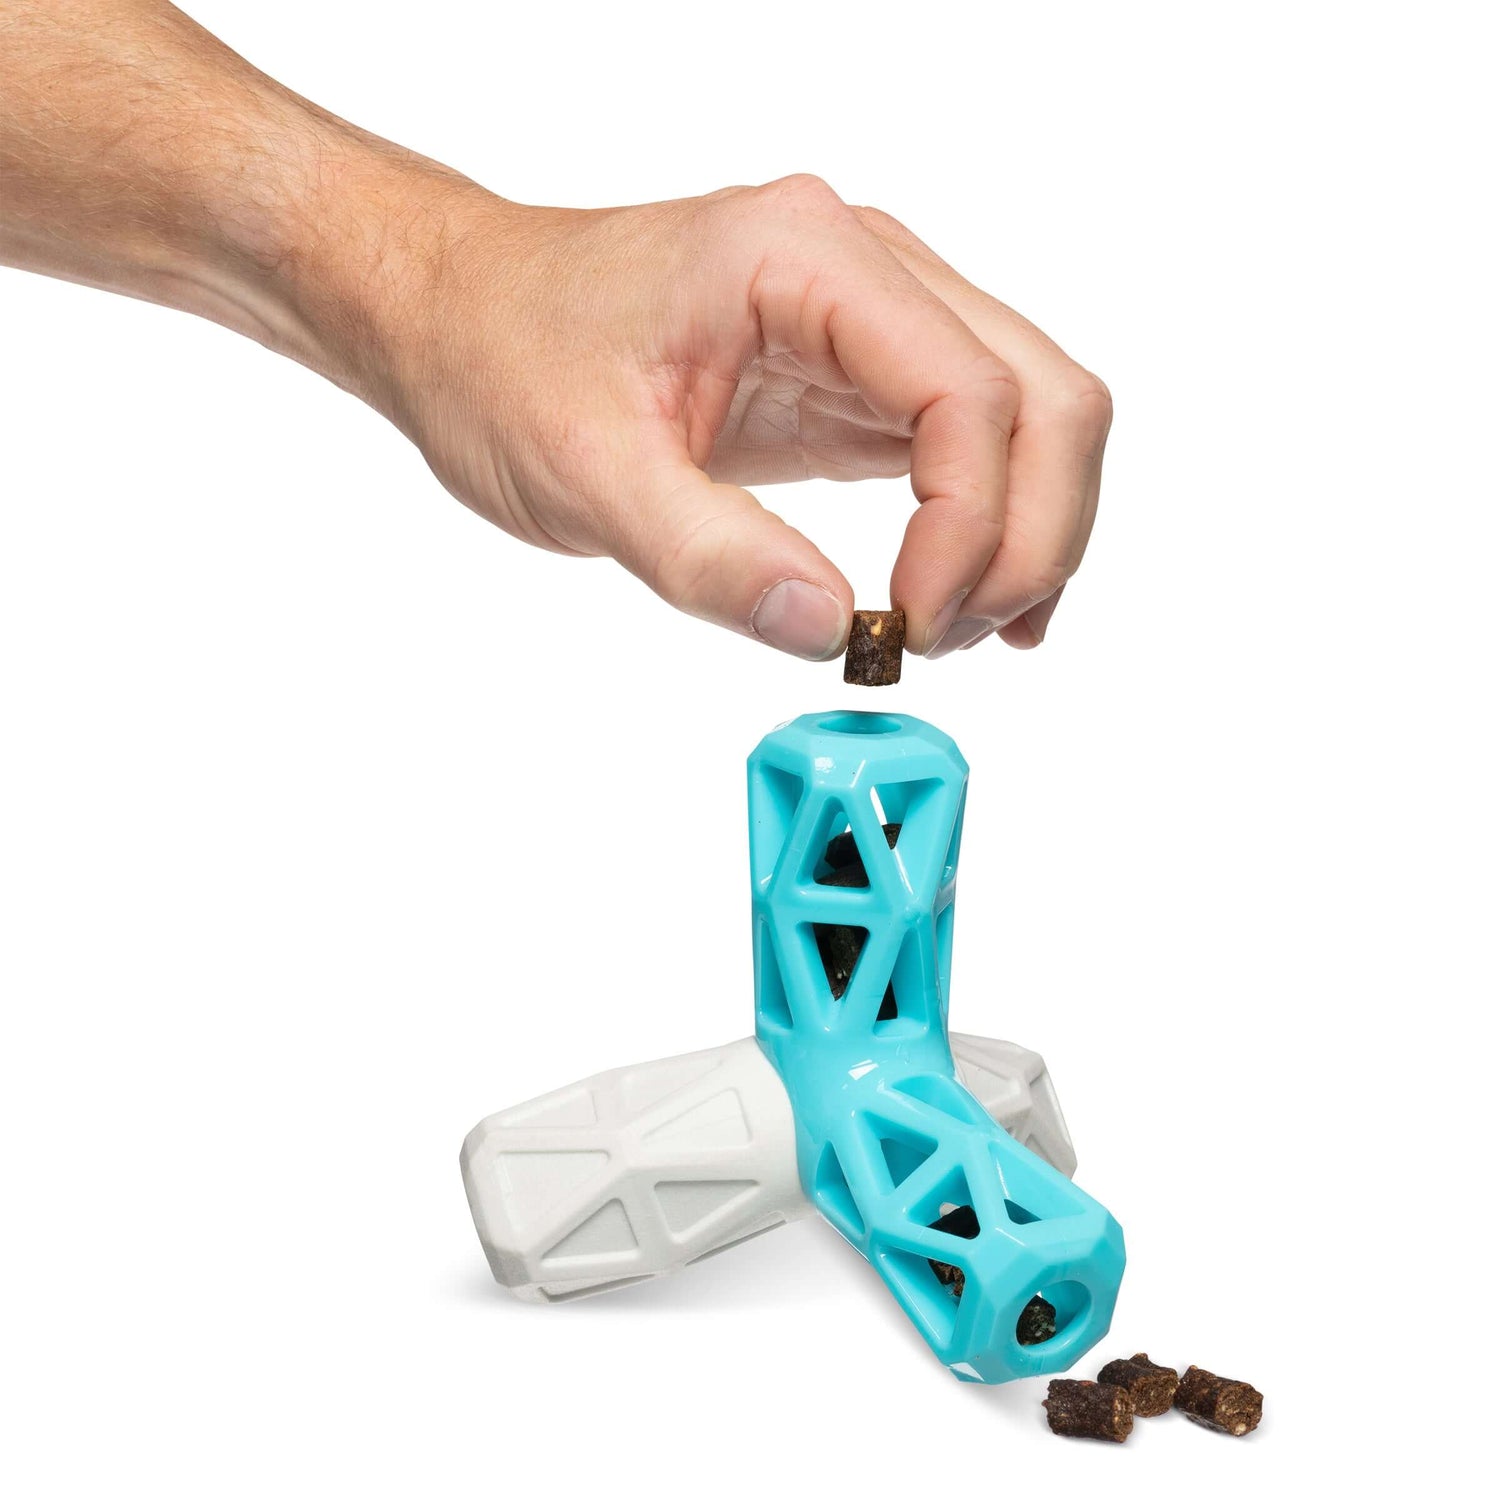 Teal pyra==mid dog toy that is great for throwing or just promoting healthy chewing habits. 